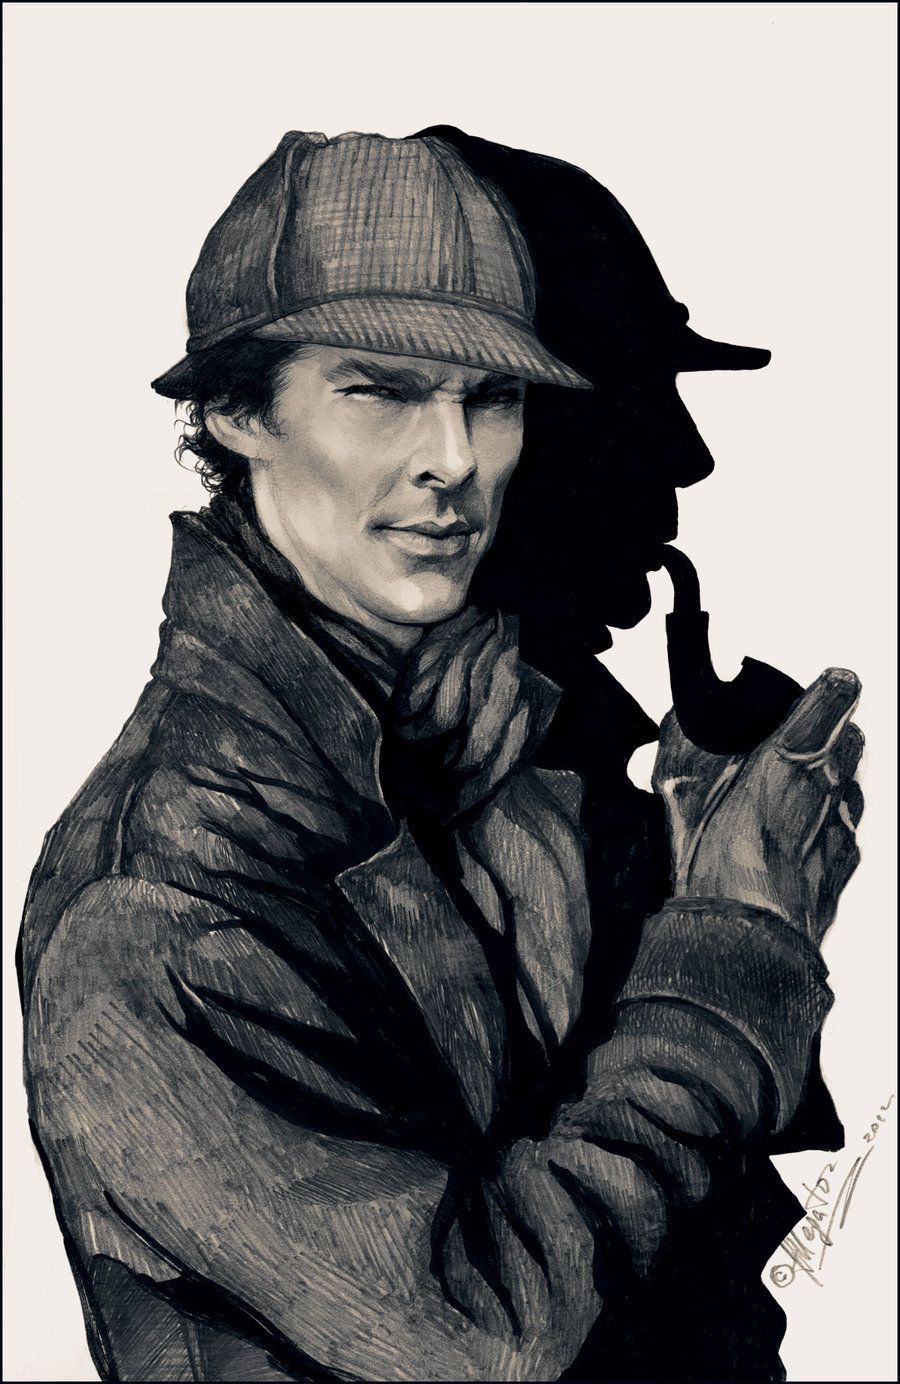 (Benedict) Sherlock in the original Sherlock Holmes attire Ahhh! Whoever did this is awesome!